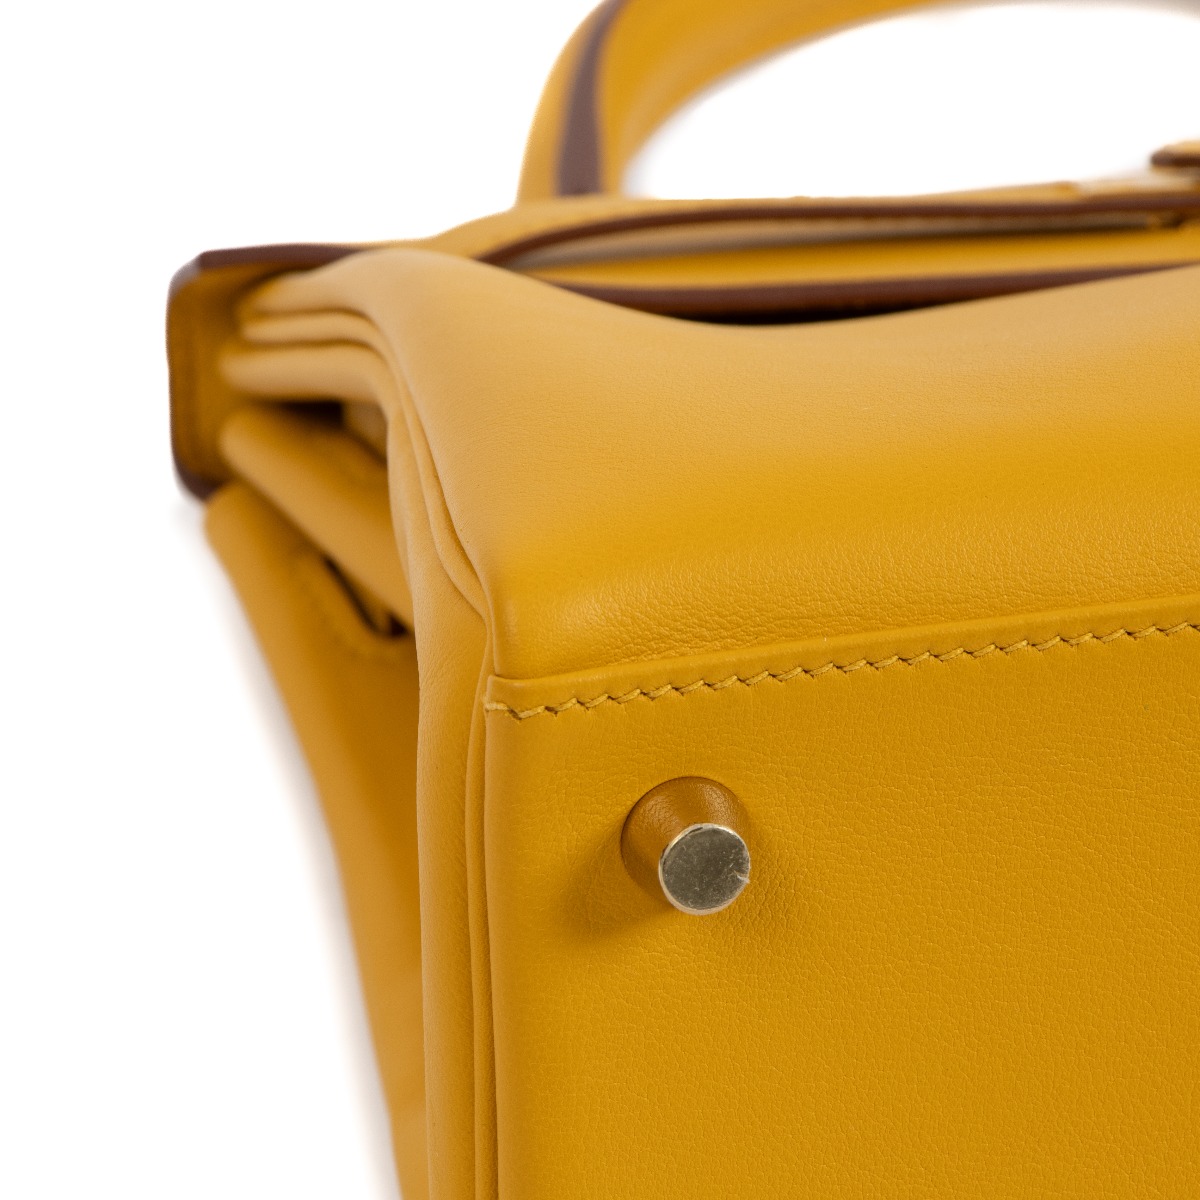 HERMÈS Kelly 25 handbag in Jaune Ambre Swift leather with Gold